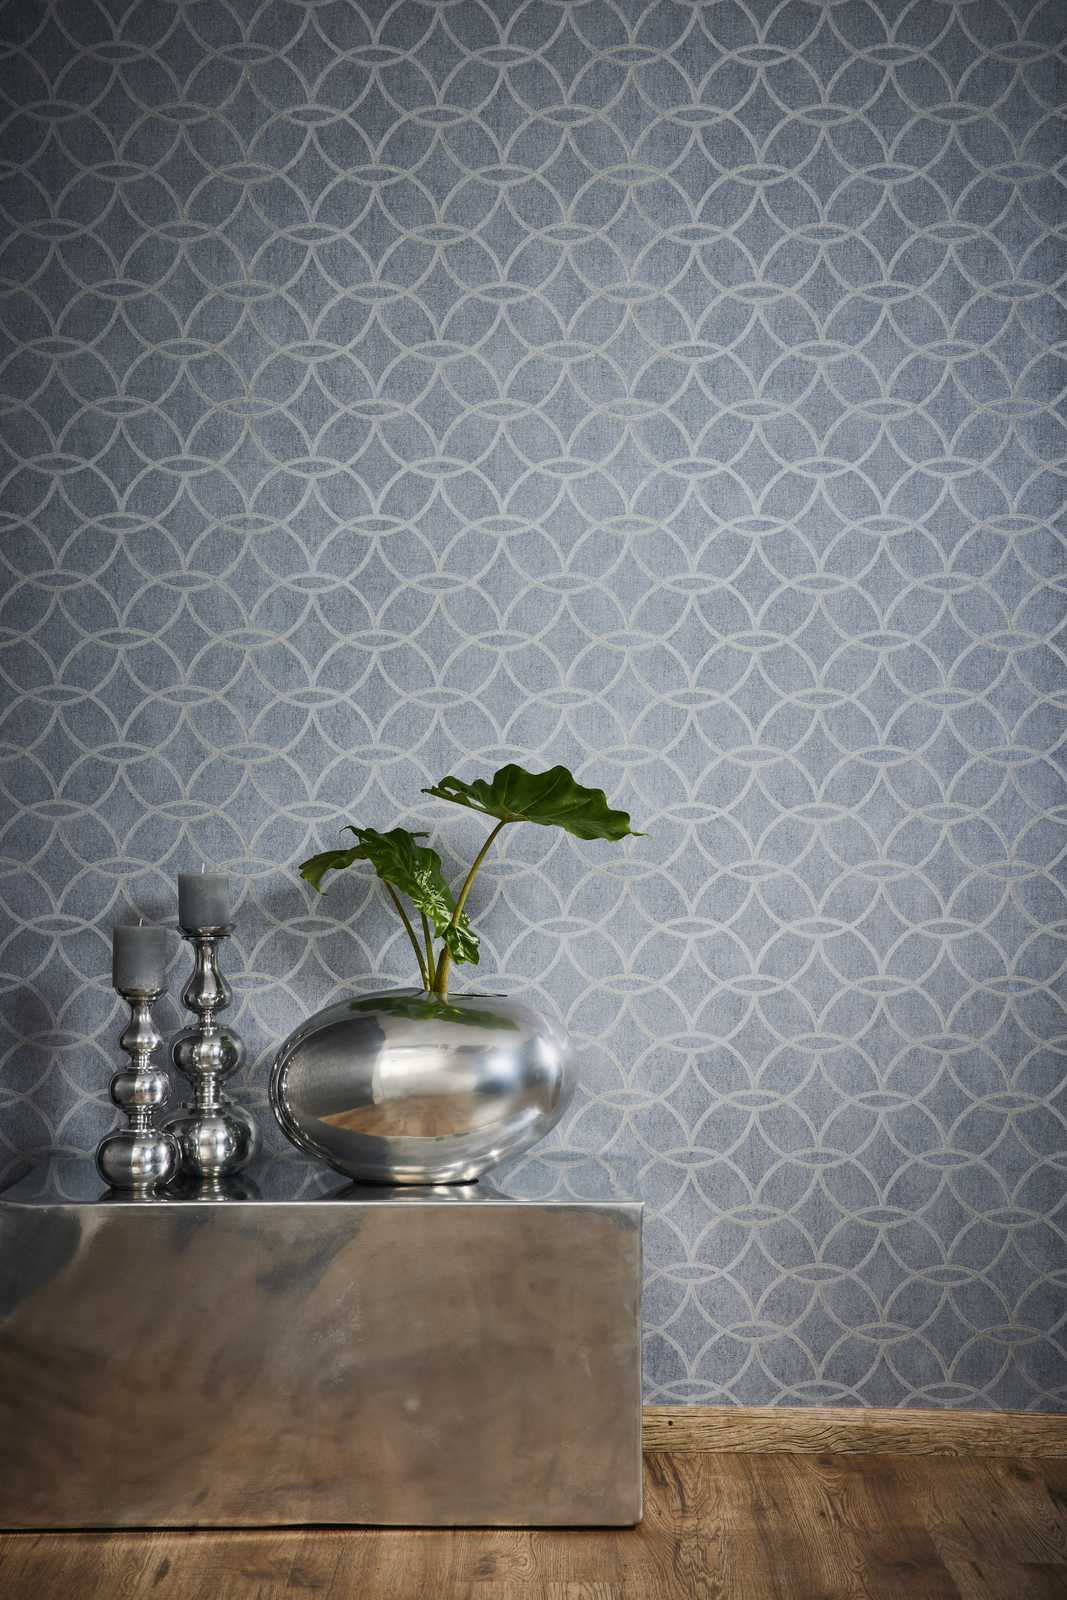             Pattern wallpaper non-woven with geometric design & shimmer effect - blue, grey
        